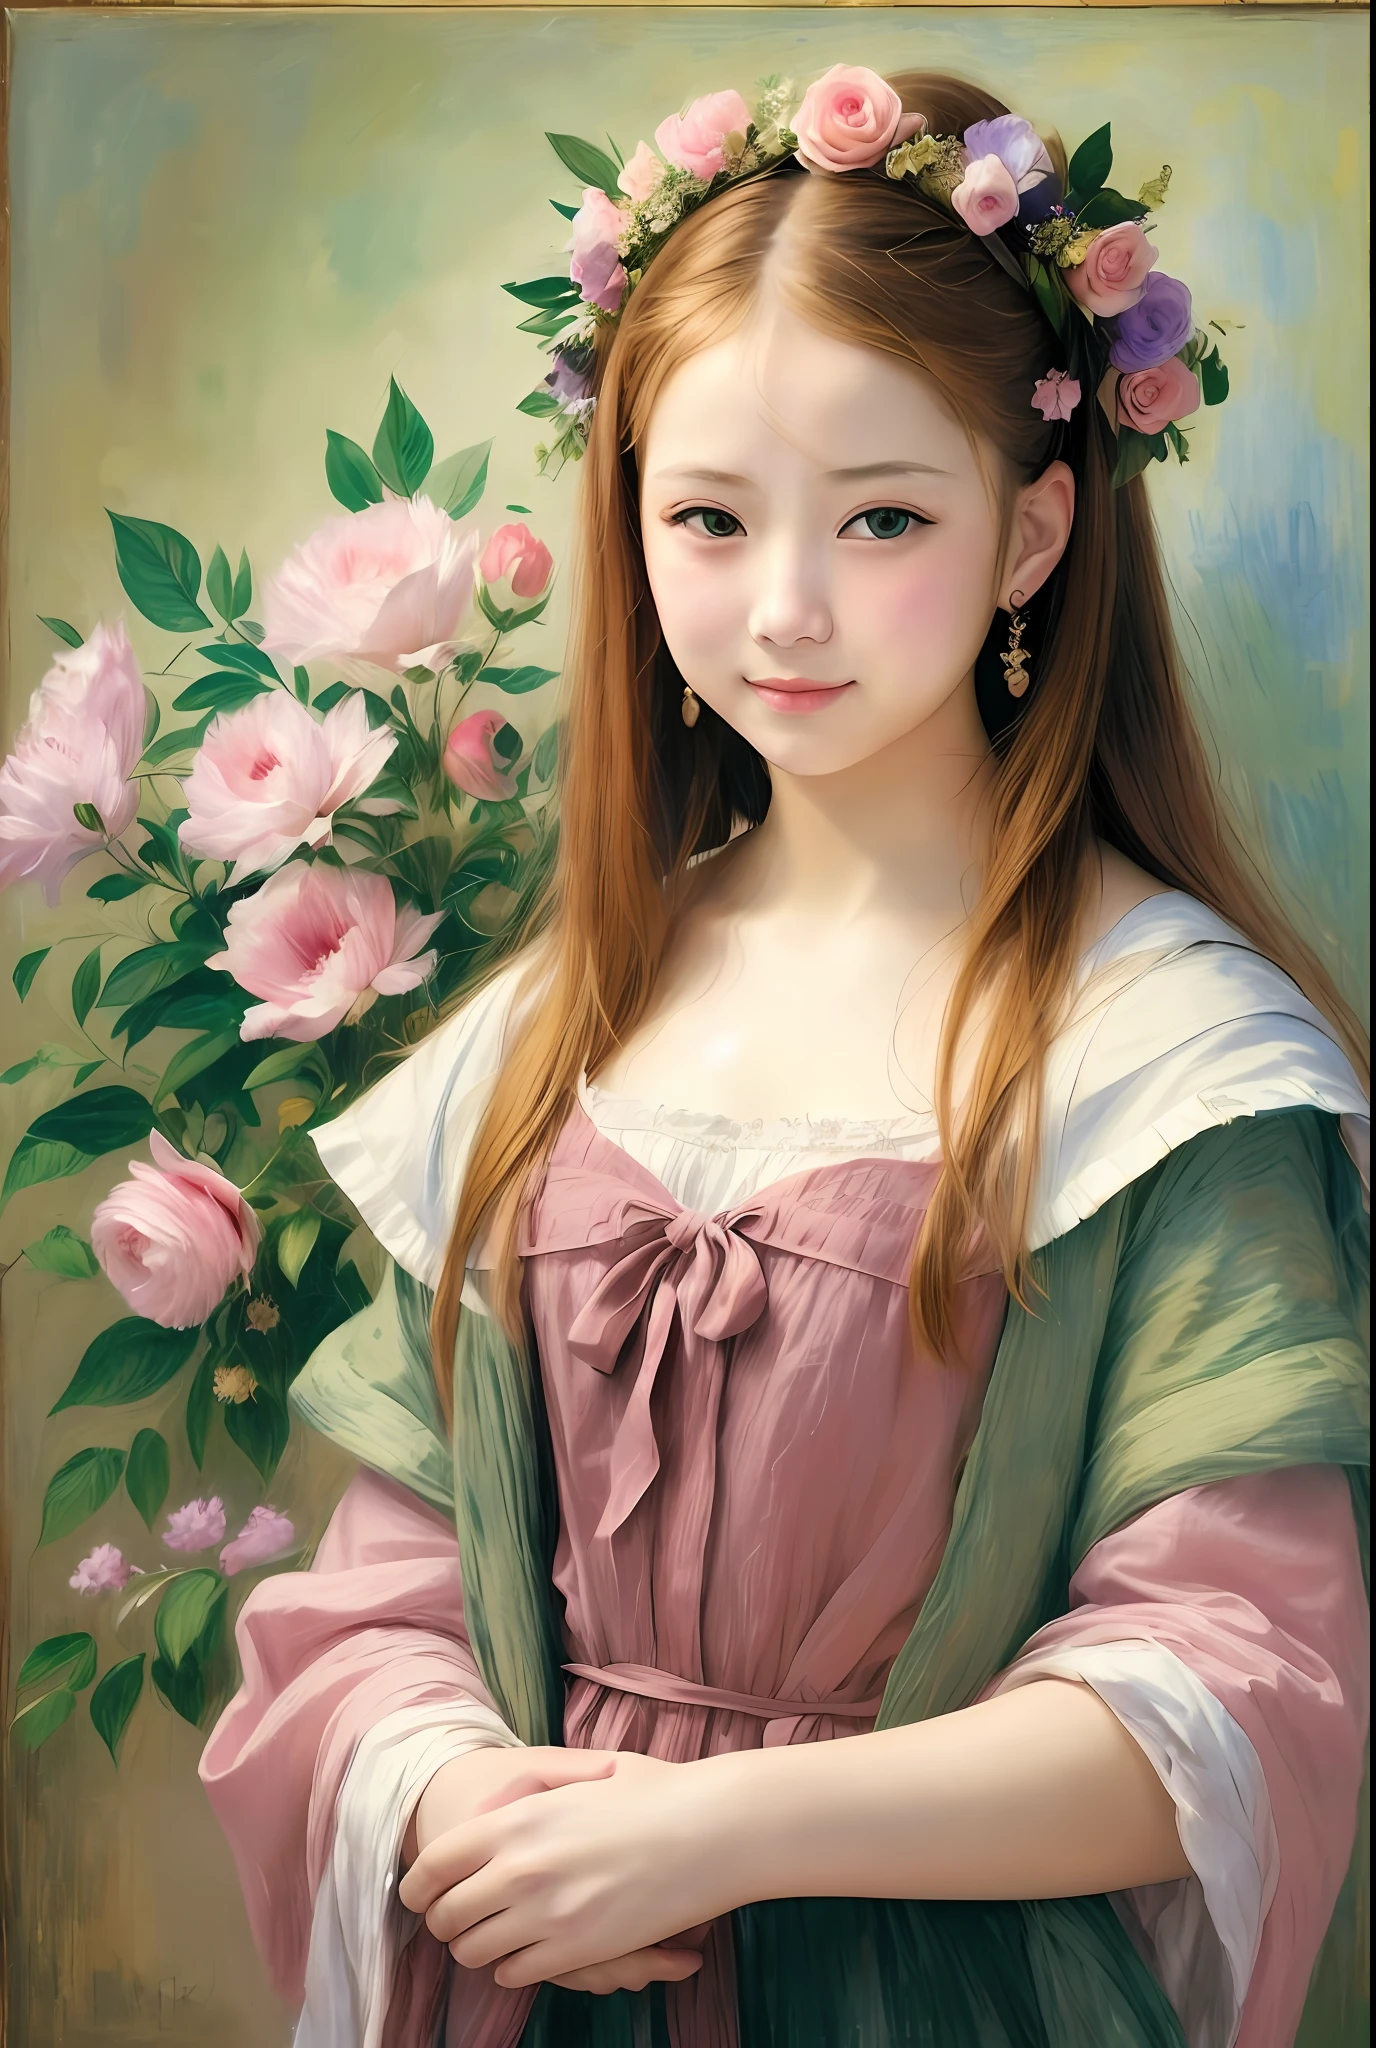 Pale Pink Illustration、(Angel wings、😇、a smile、😌🥰Archaic Smile).hyper realstic、Ultra-realistic、Depiction of the human body without distortion、Monna Lisa、Woman in the Arms、Near and far law、Three-dimensional、Contemporary painting、moderno、world masterpiece、collection、Homage to the art or artist work of Picasso and Renoir, Not sentimental、Excellent portrayal、Gentle expression、More detailed character faces, Serious competition、Compositions like paintings、(Konmutsuki_Gacha_Series 1, punk_rosette), Realistic、Delicate brushwork、aqua color flowers, (Full body, elegant flowers background)